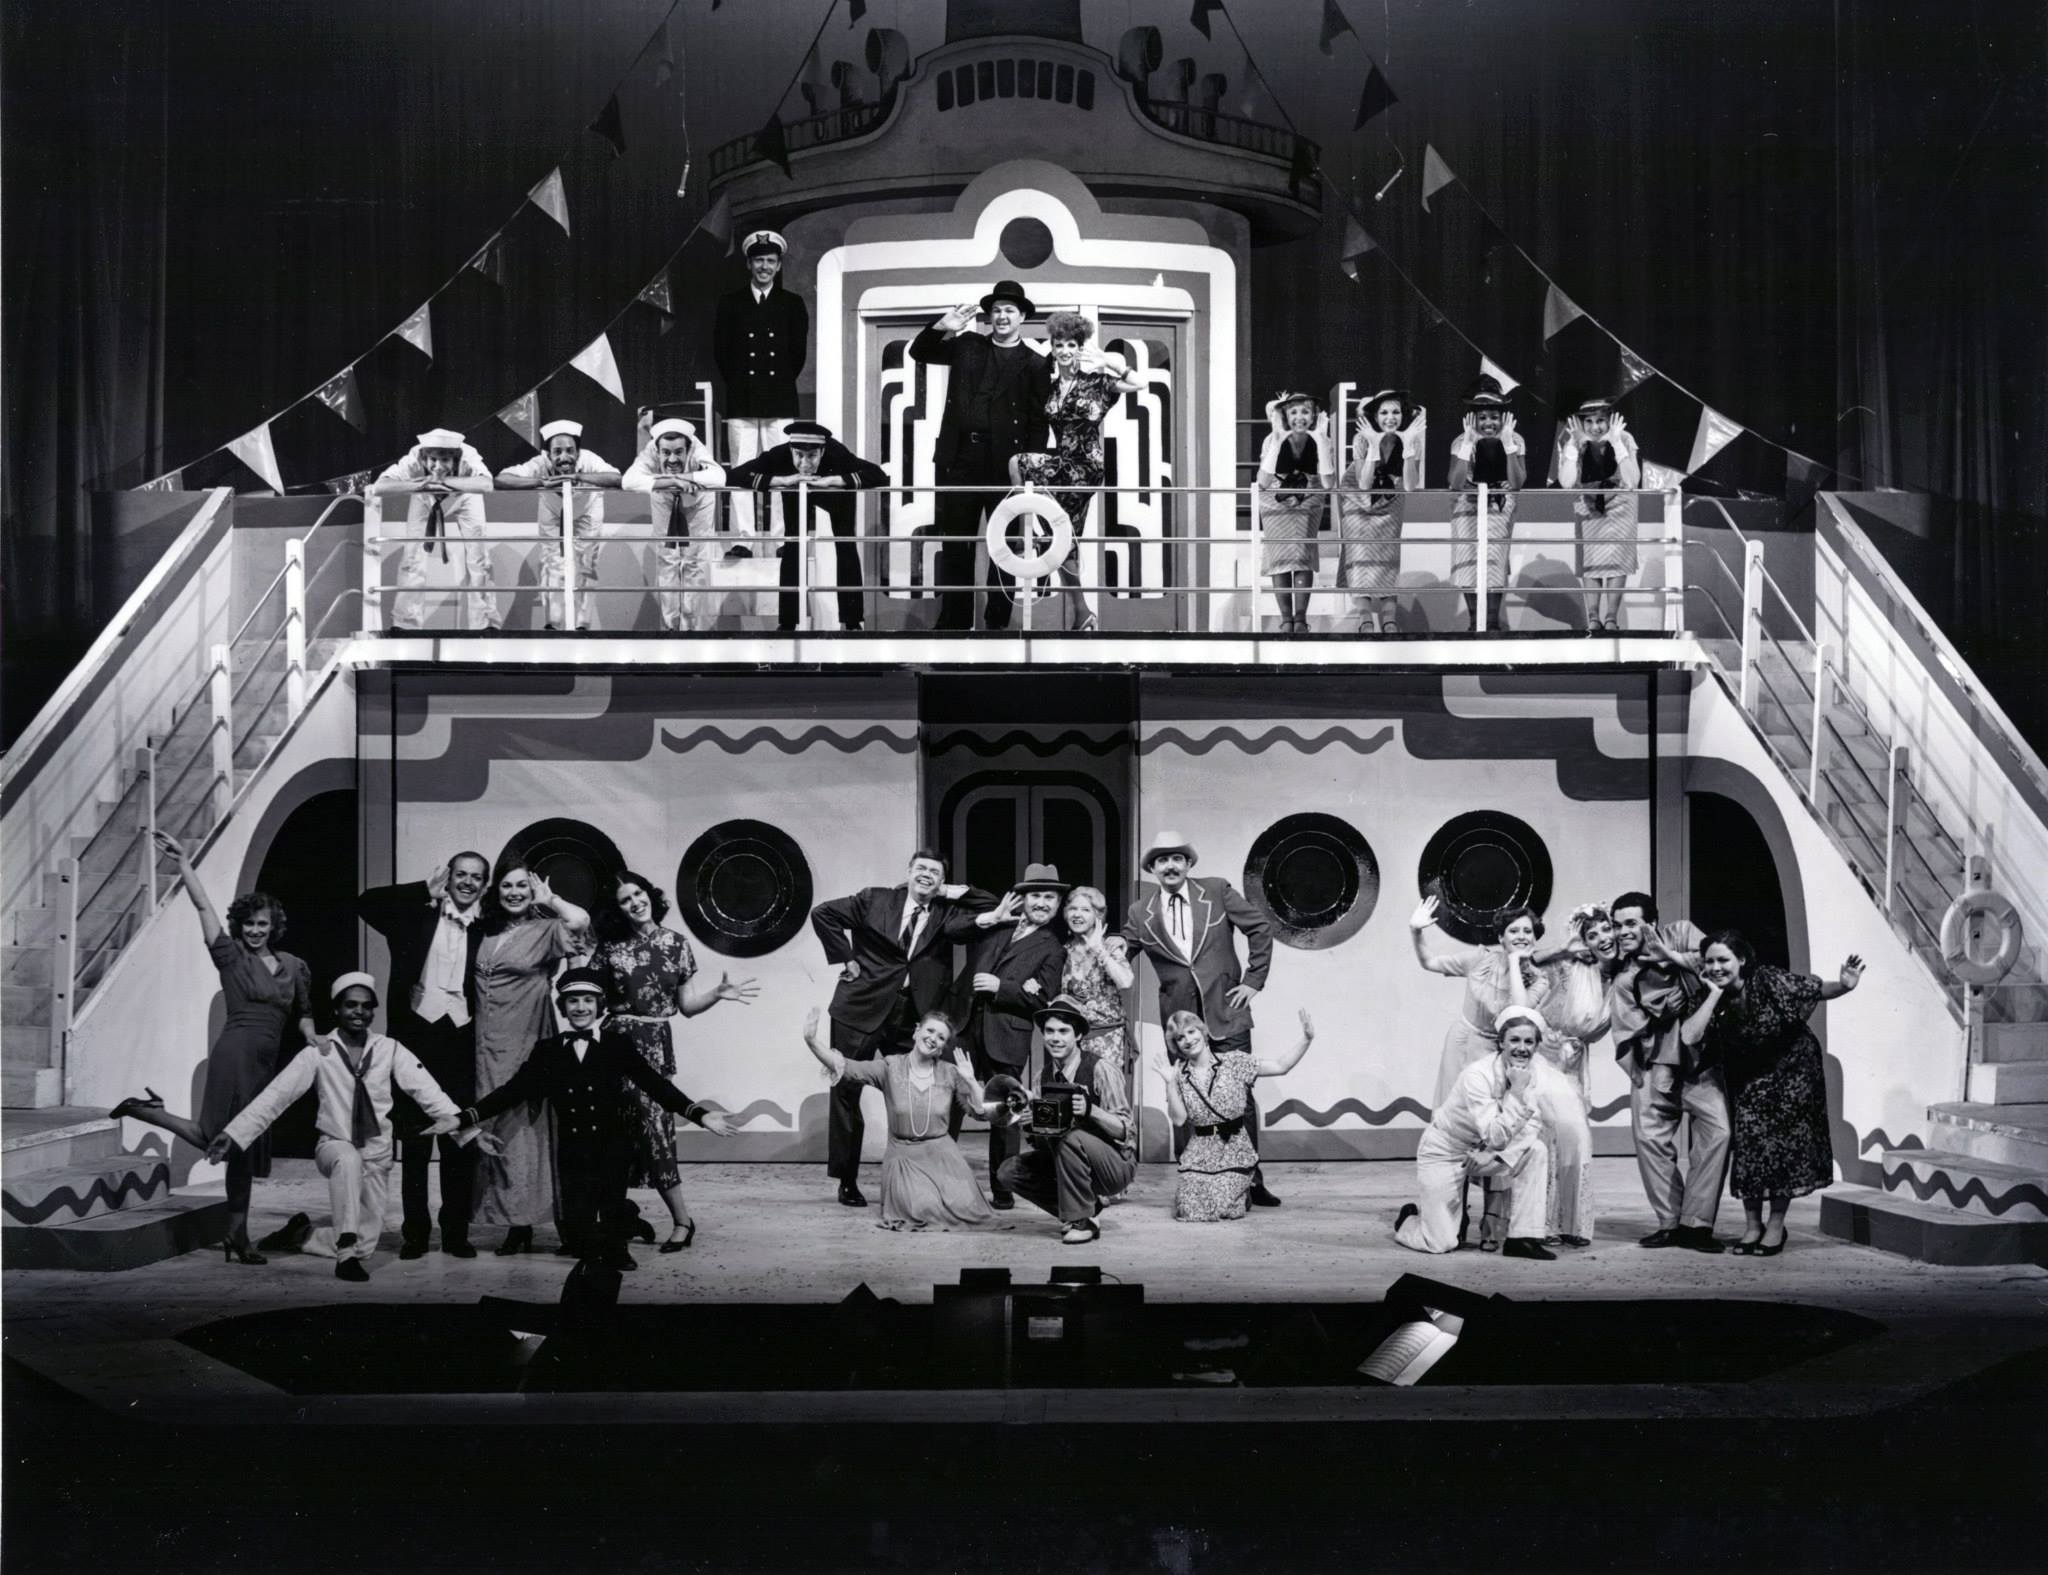 Performance of Anything Goes